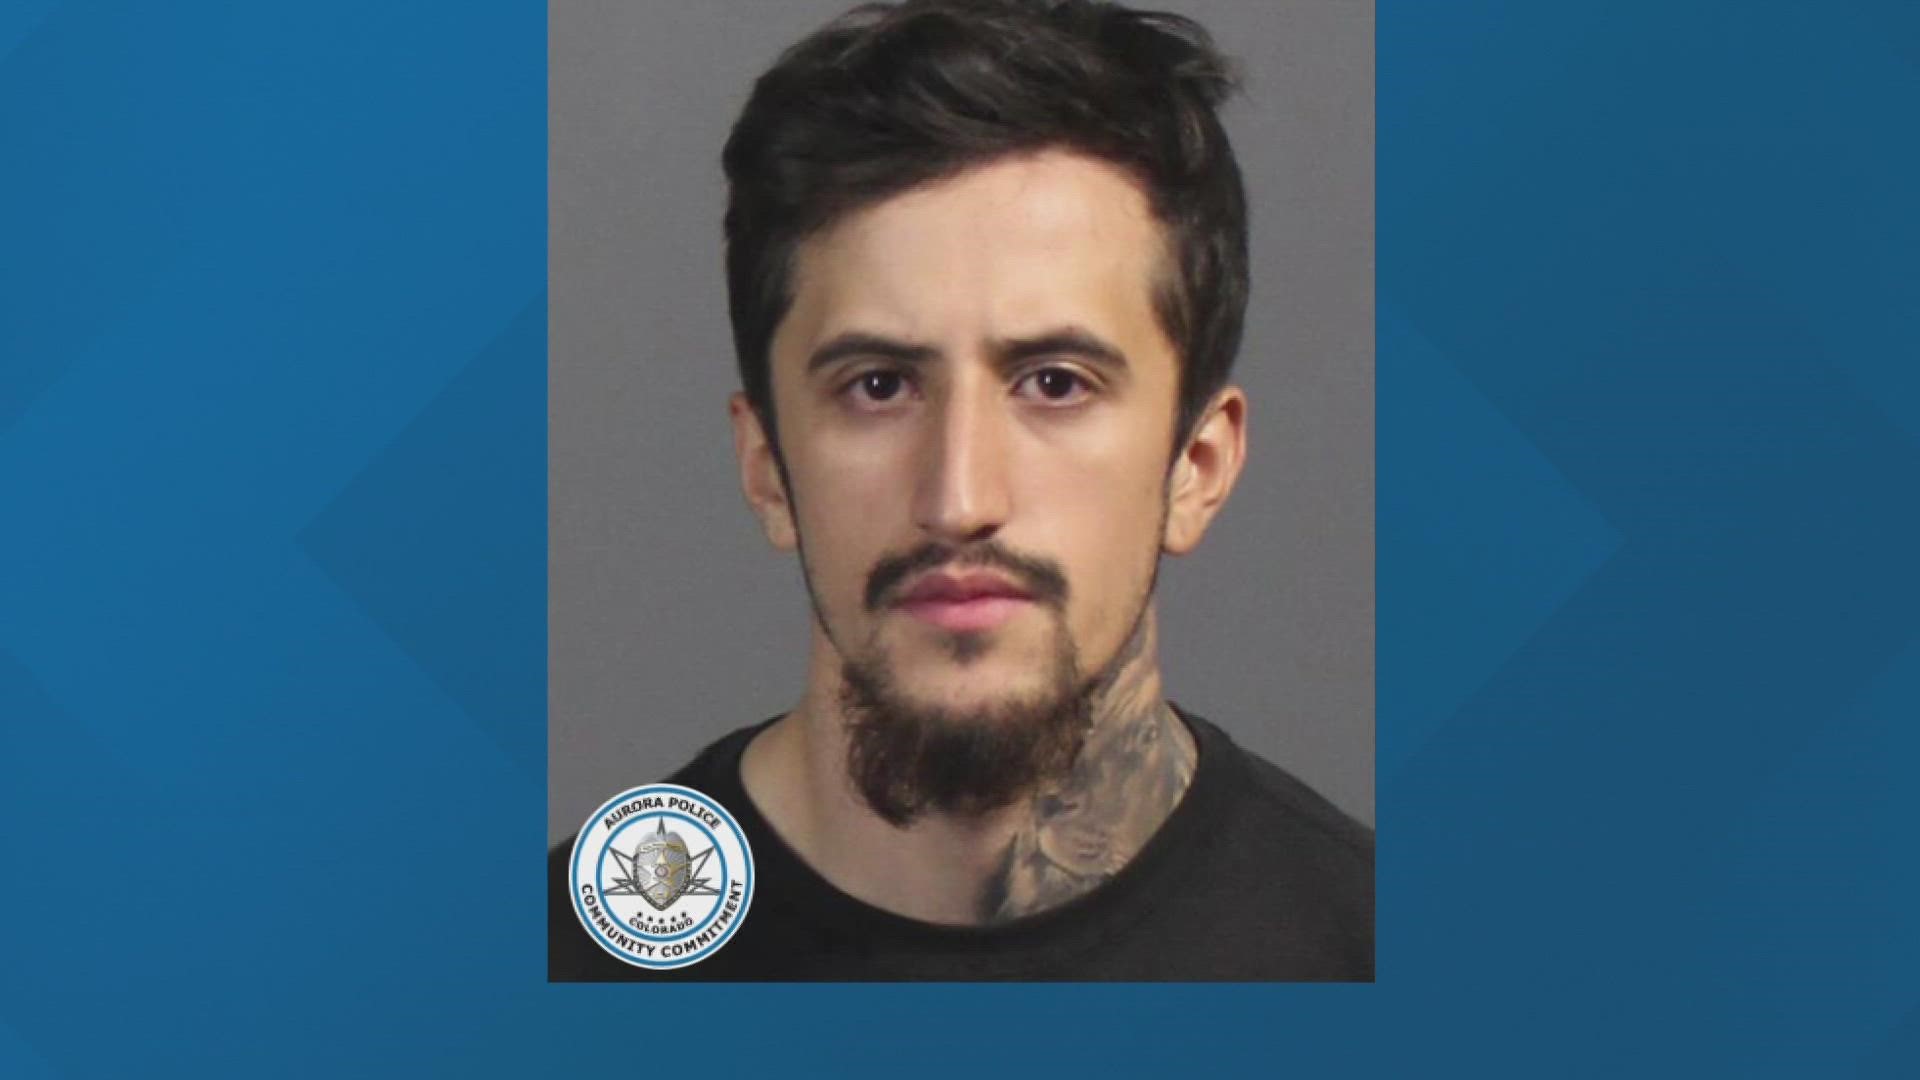 Aurora Police are searching for Joseph Castorena in connection to the shooting Sunday. A $15,000 reward is being offered for information leading to an arrest.